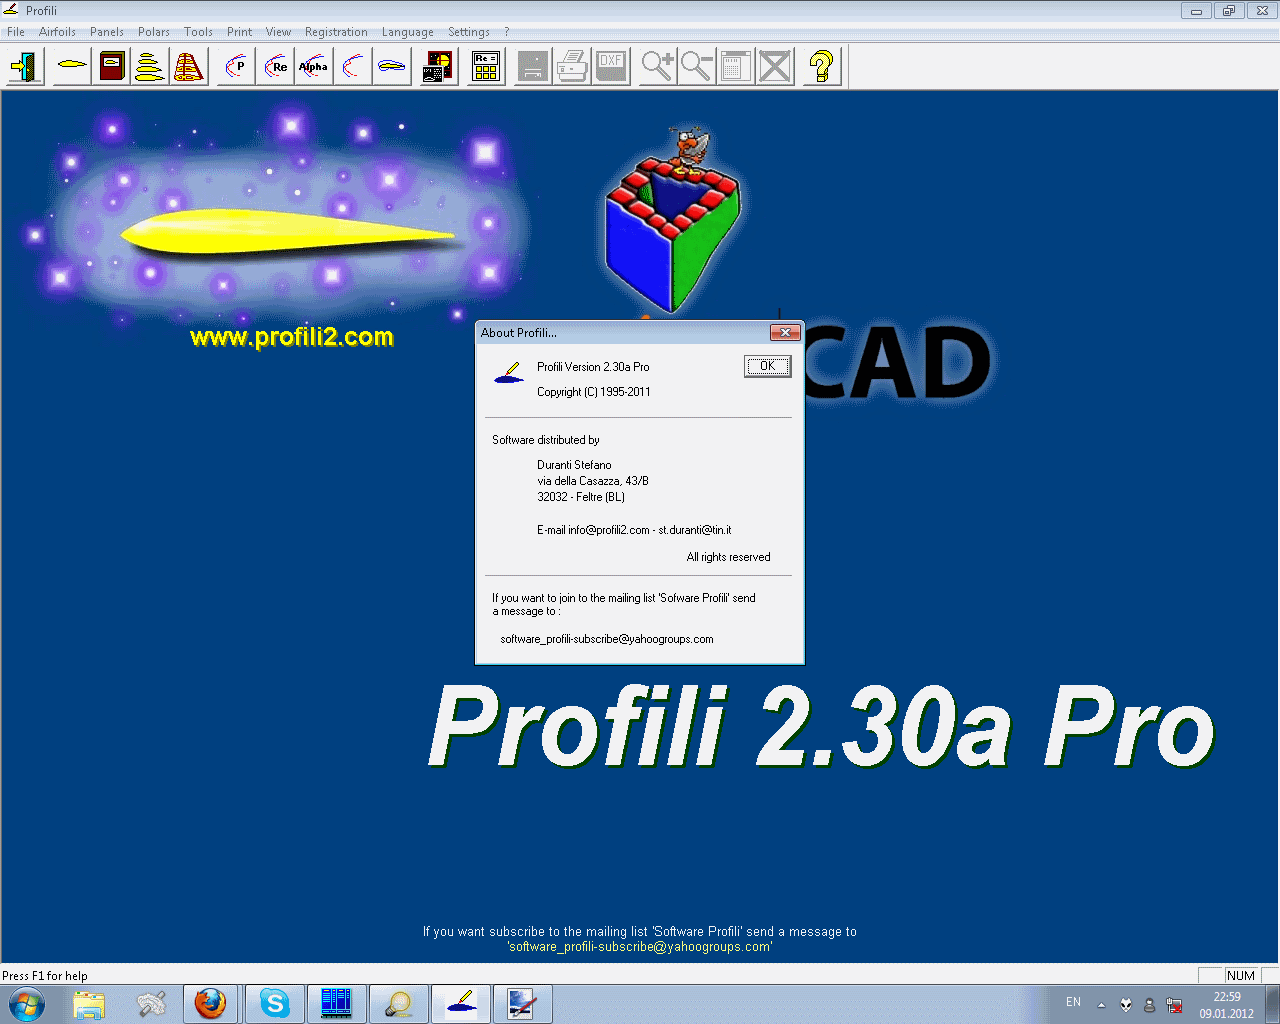 Working with Profili 2.30a Pro full